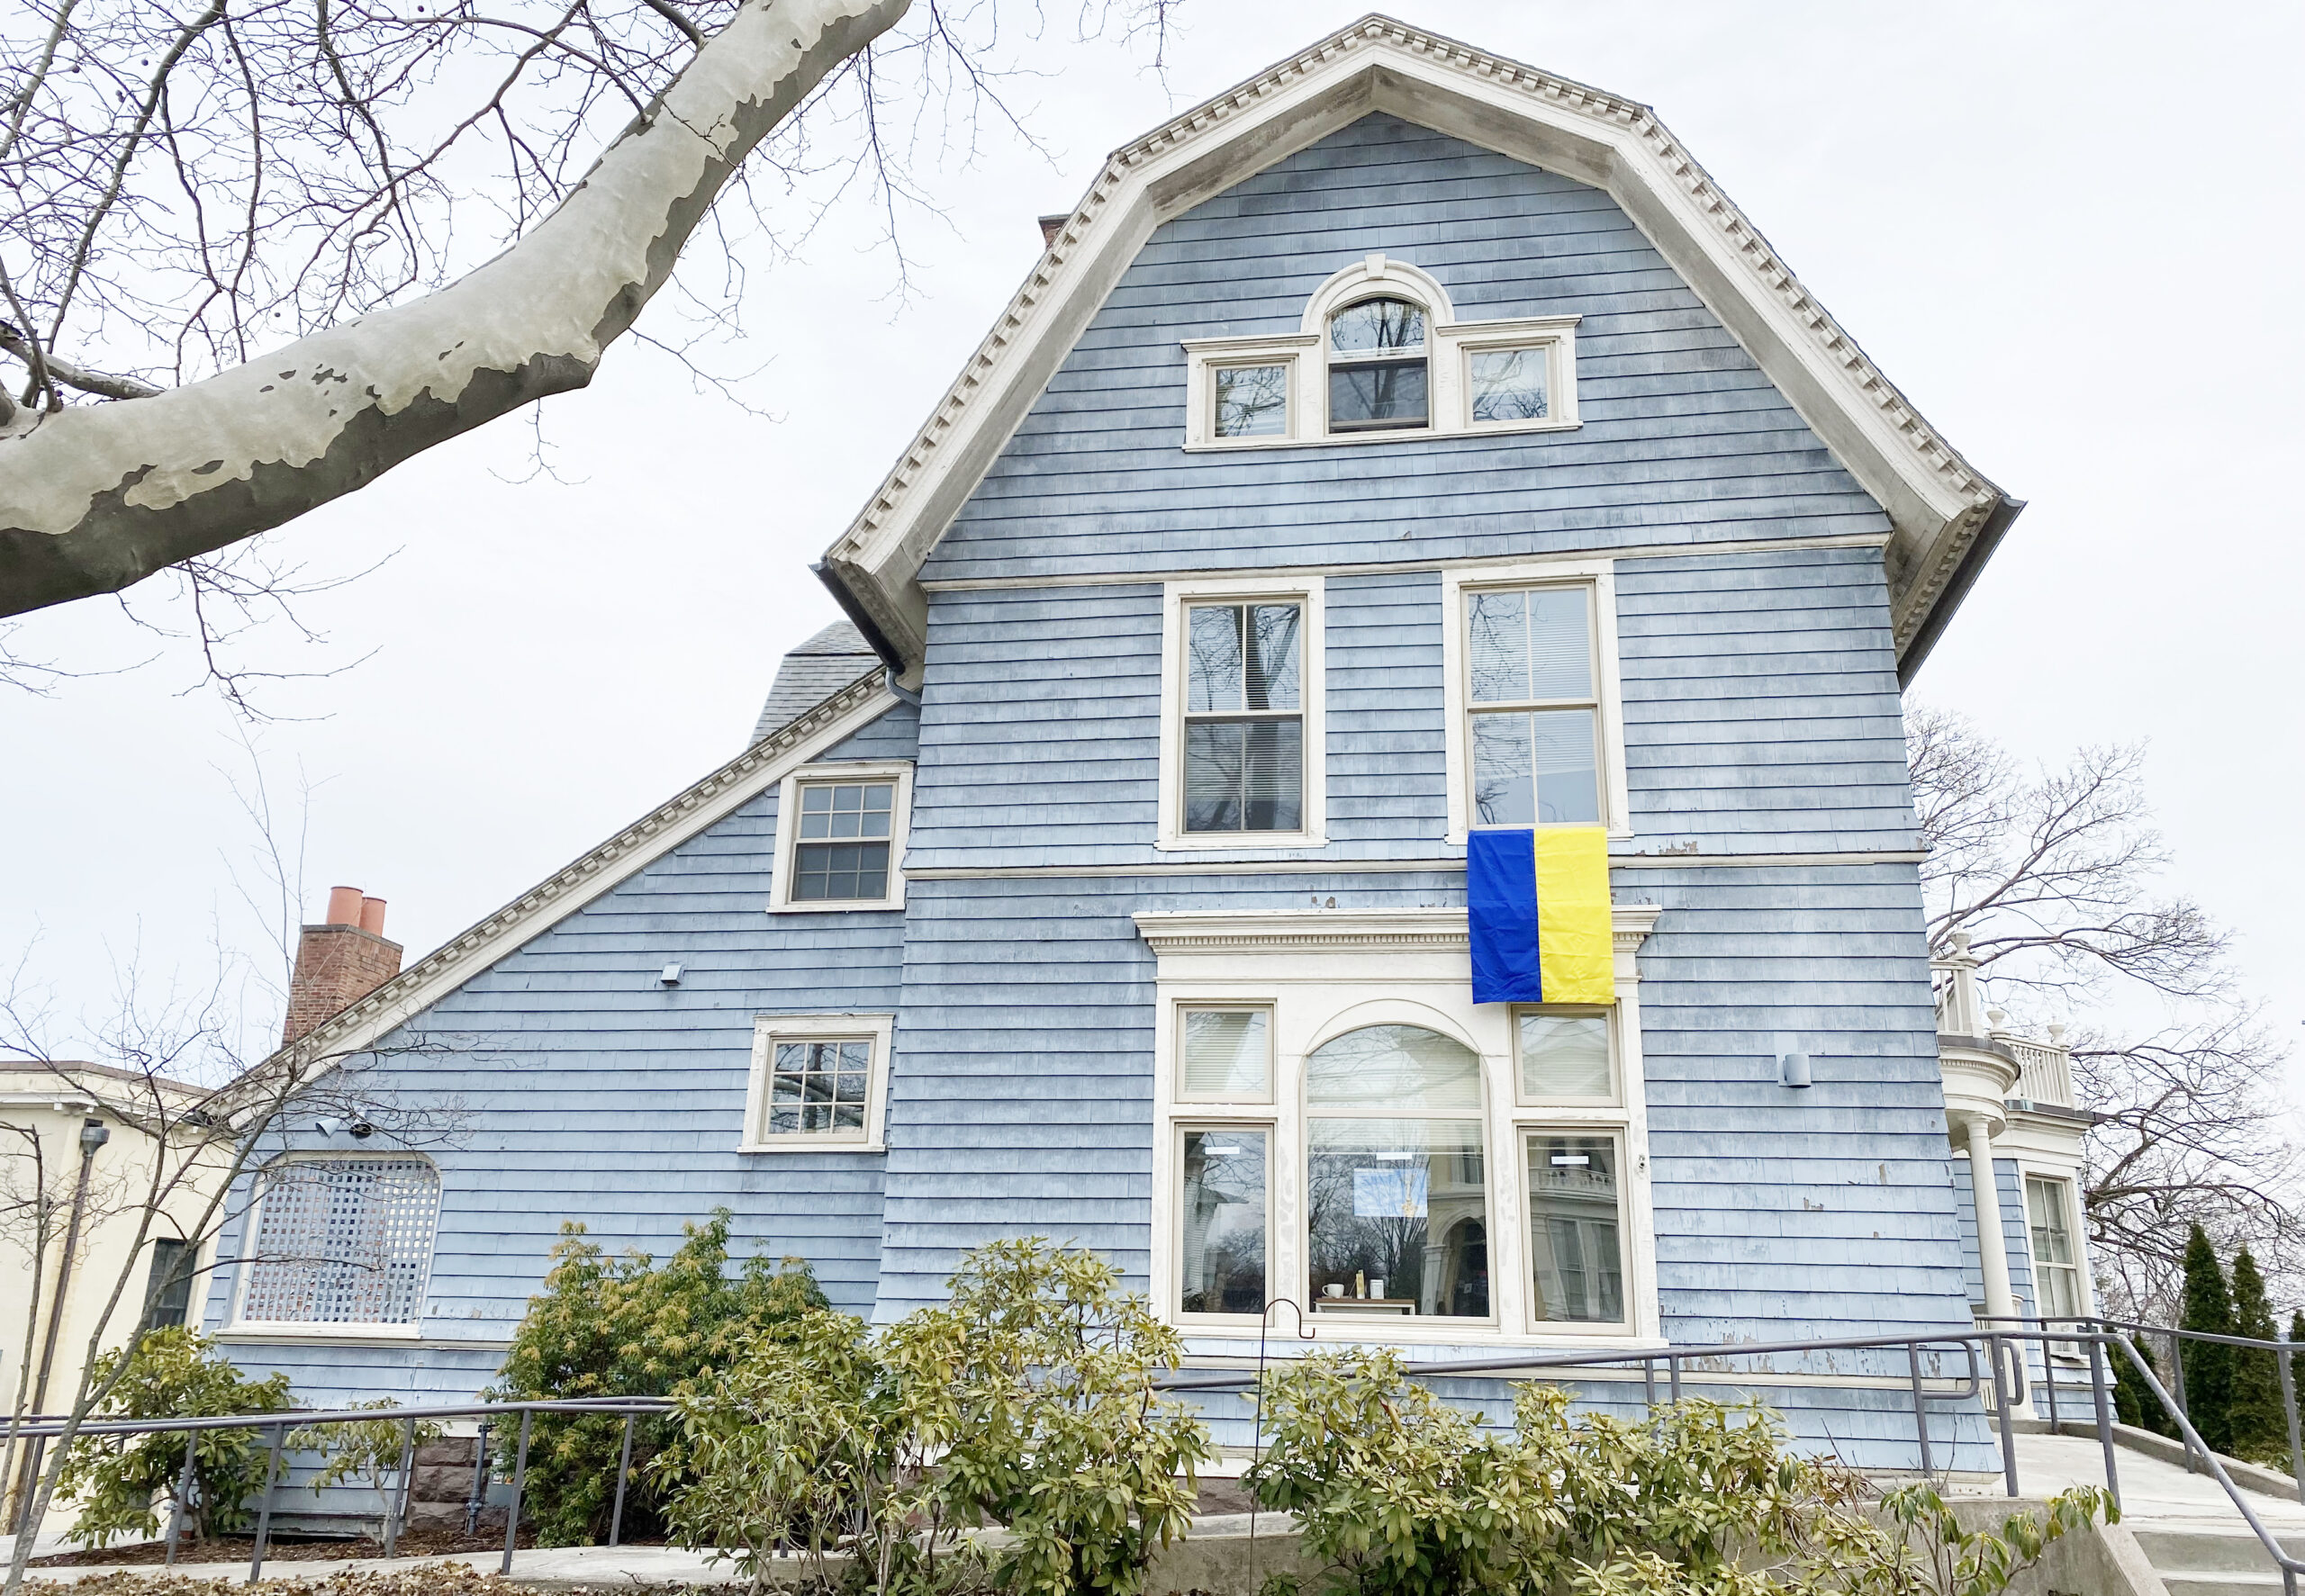 The College of the Environment, which has co-sponsored several of the Ukraine events, displays a Ukraine flag from its building on High Street. (Photo by Laurie Kenney)